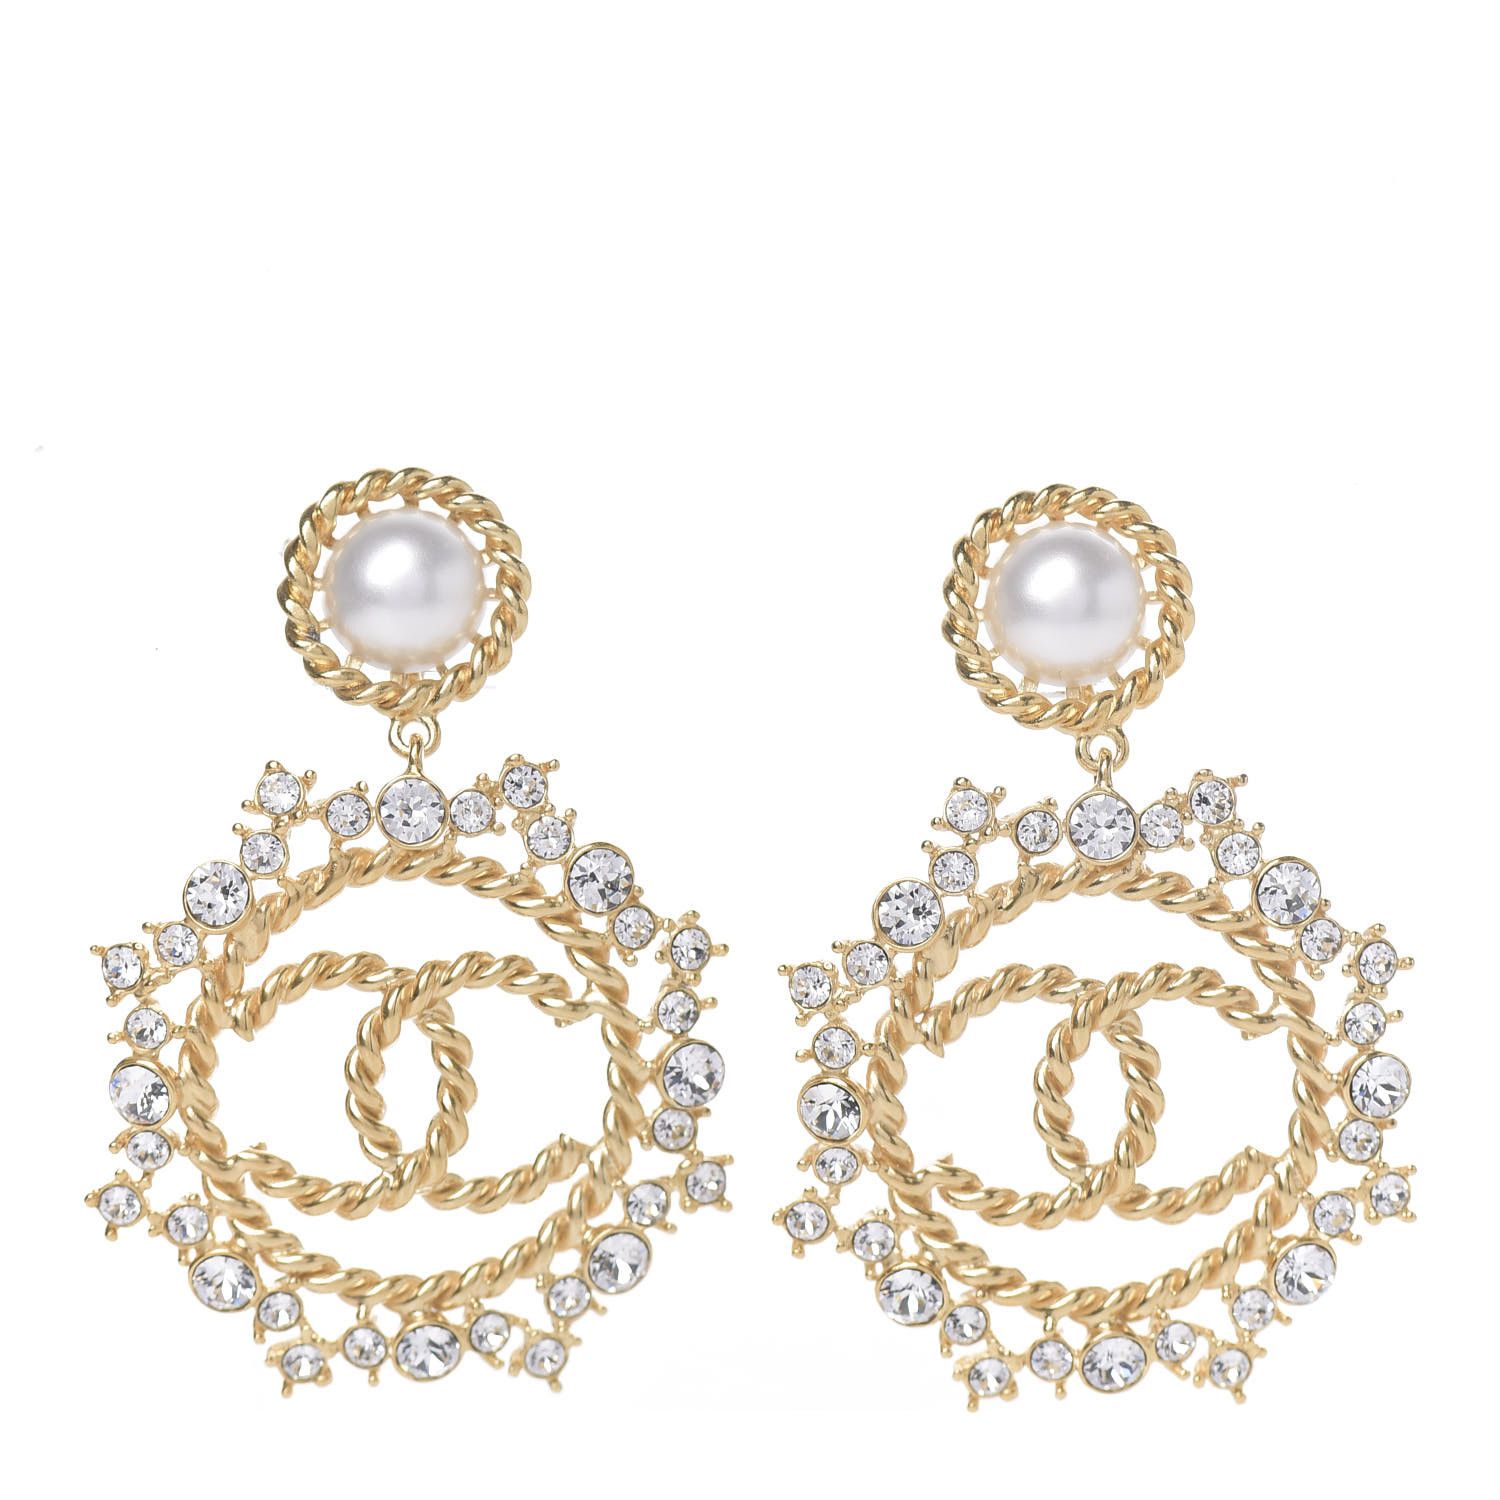 Pearl Crystal CC-Casino Clip On Earrings Gold | Fashionphile